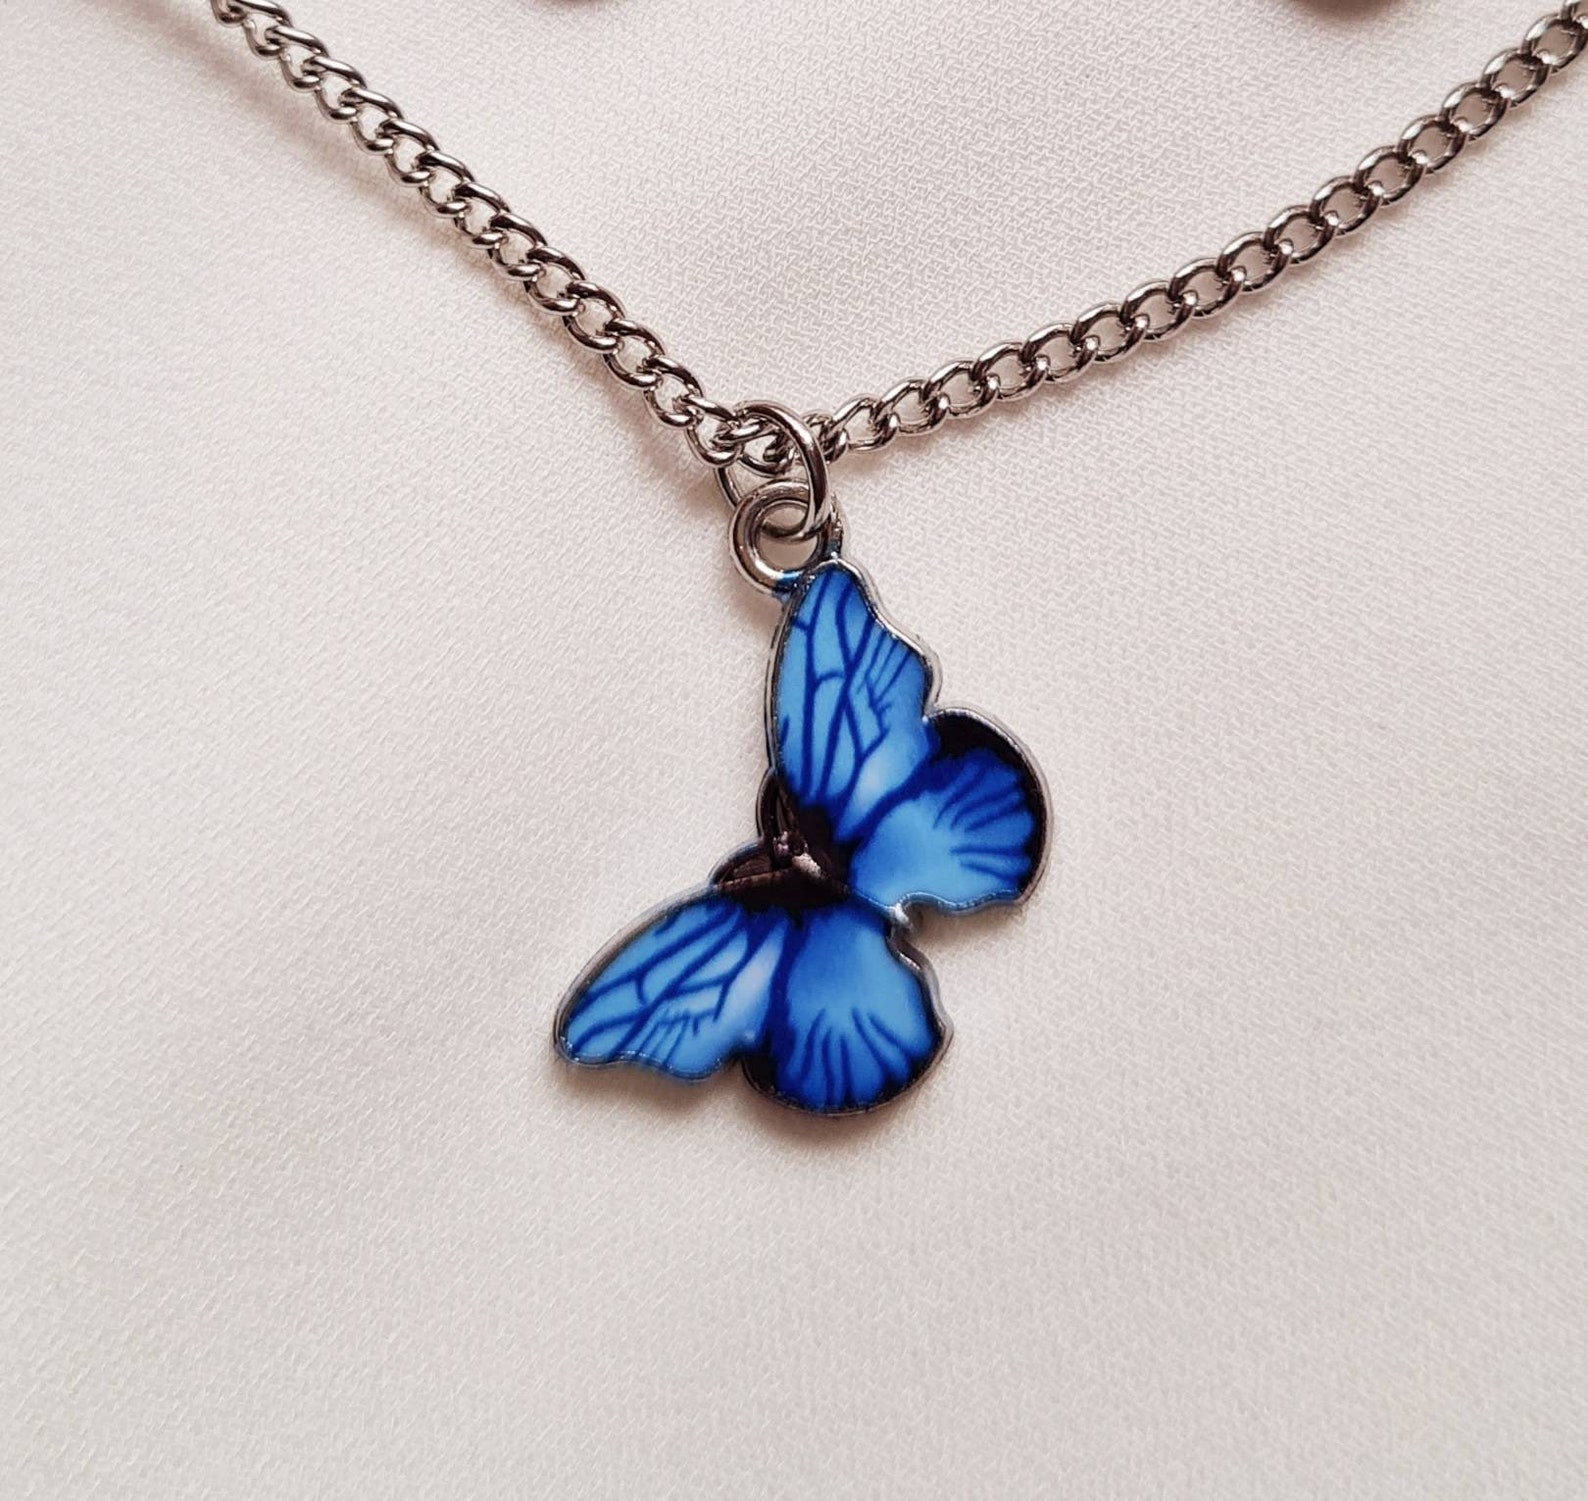 Coulor Changing Butterfly Necklace l Cute Aesthetic Minimalist | Etsy